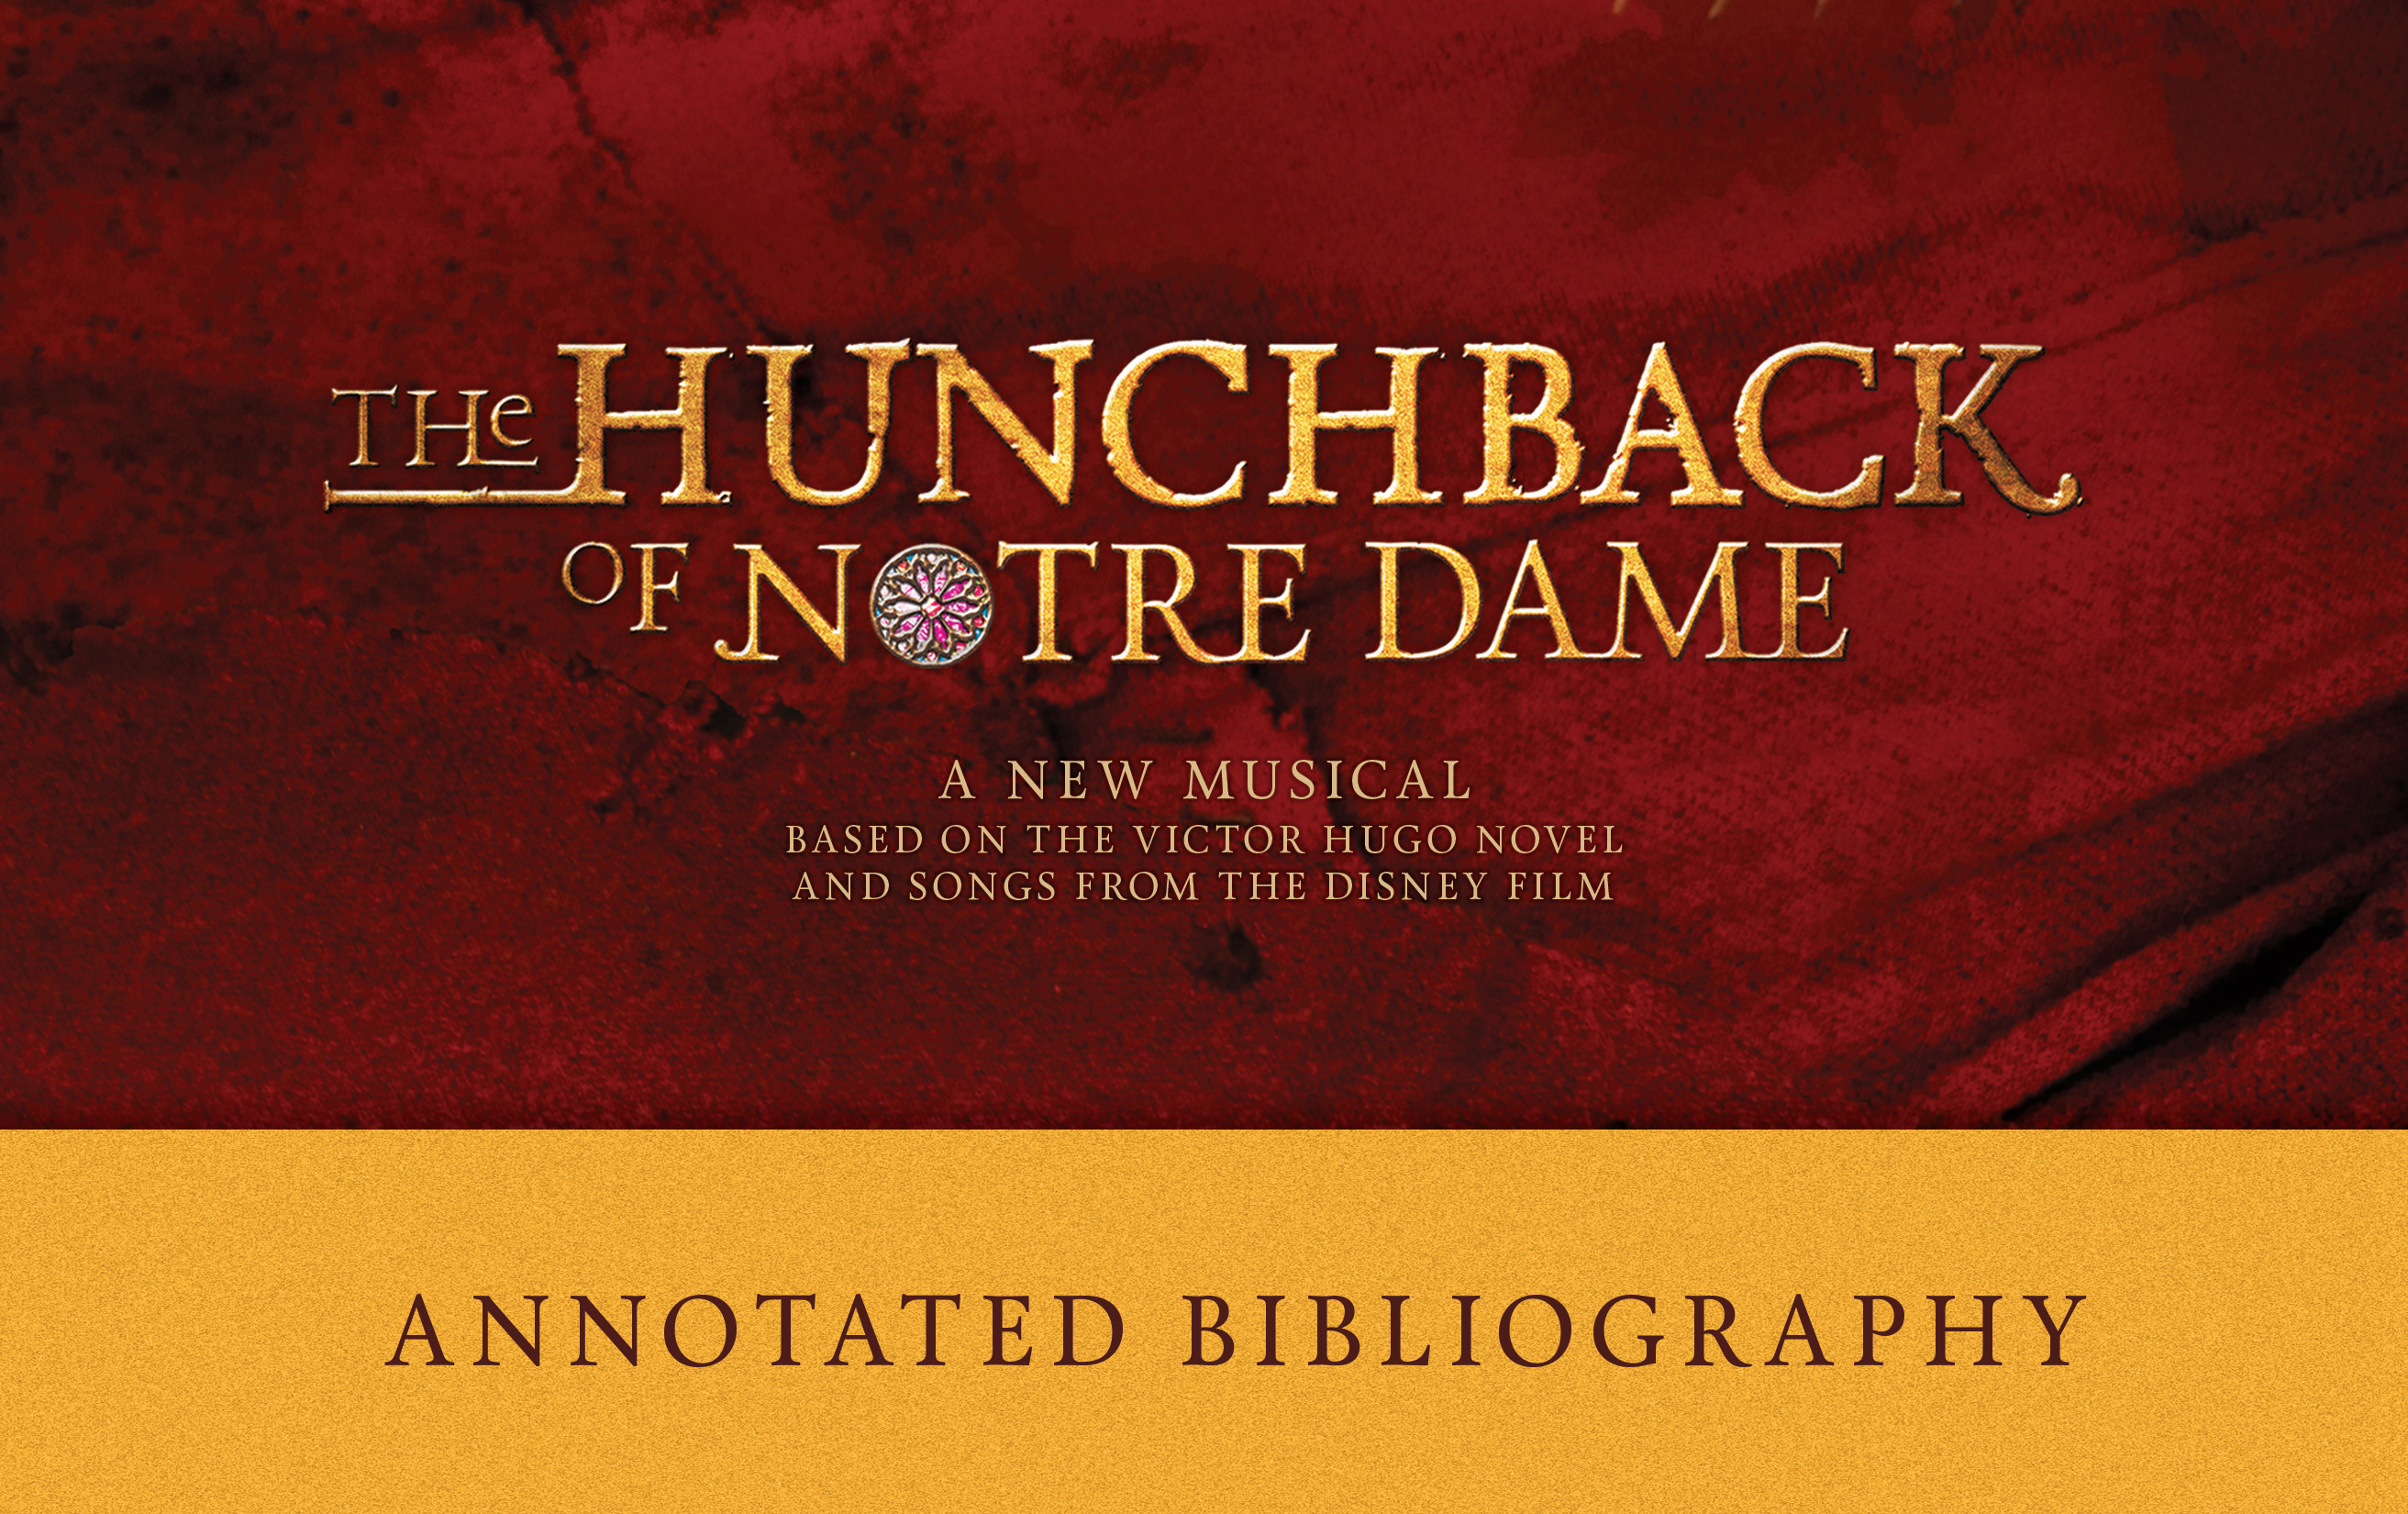 THE HUNCHBACK OF NOTRE DAME Annotated Bibliography